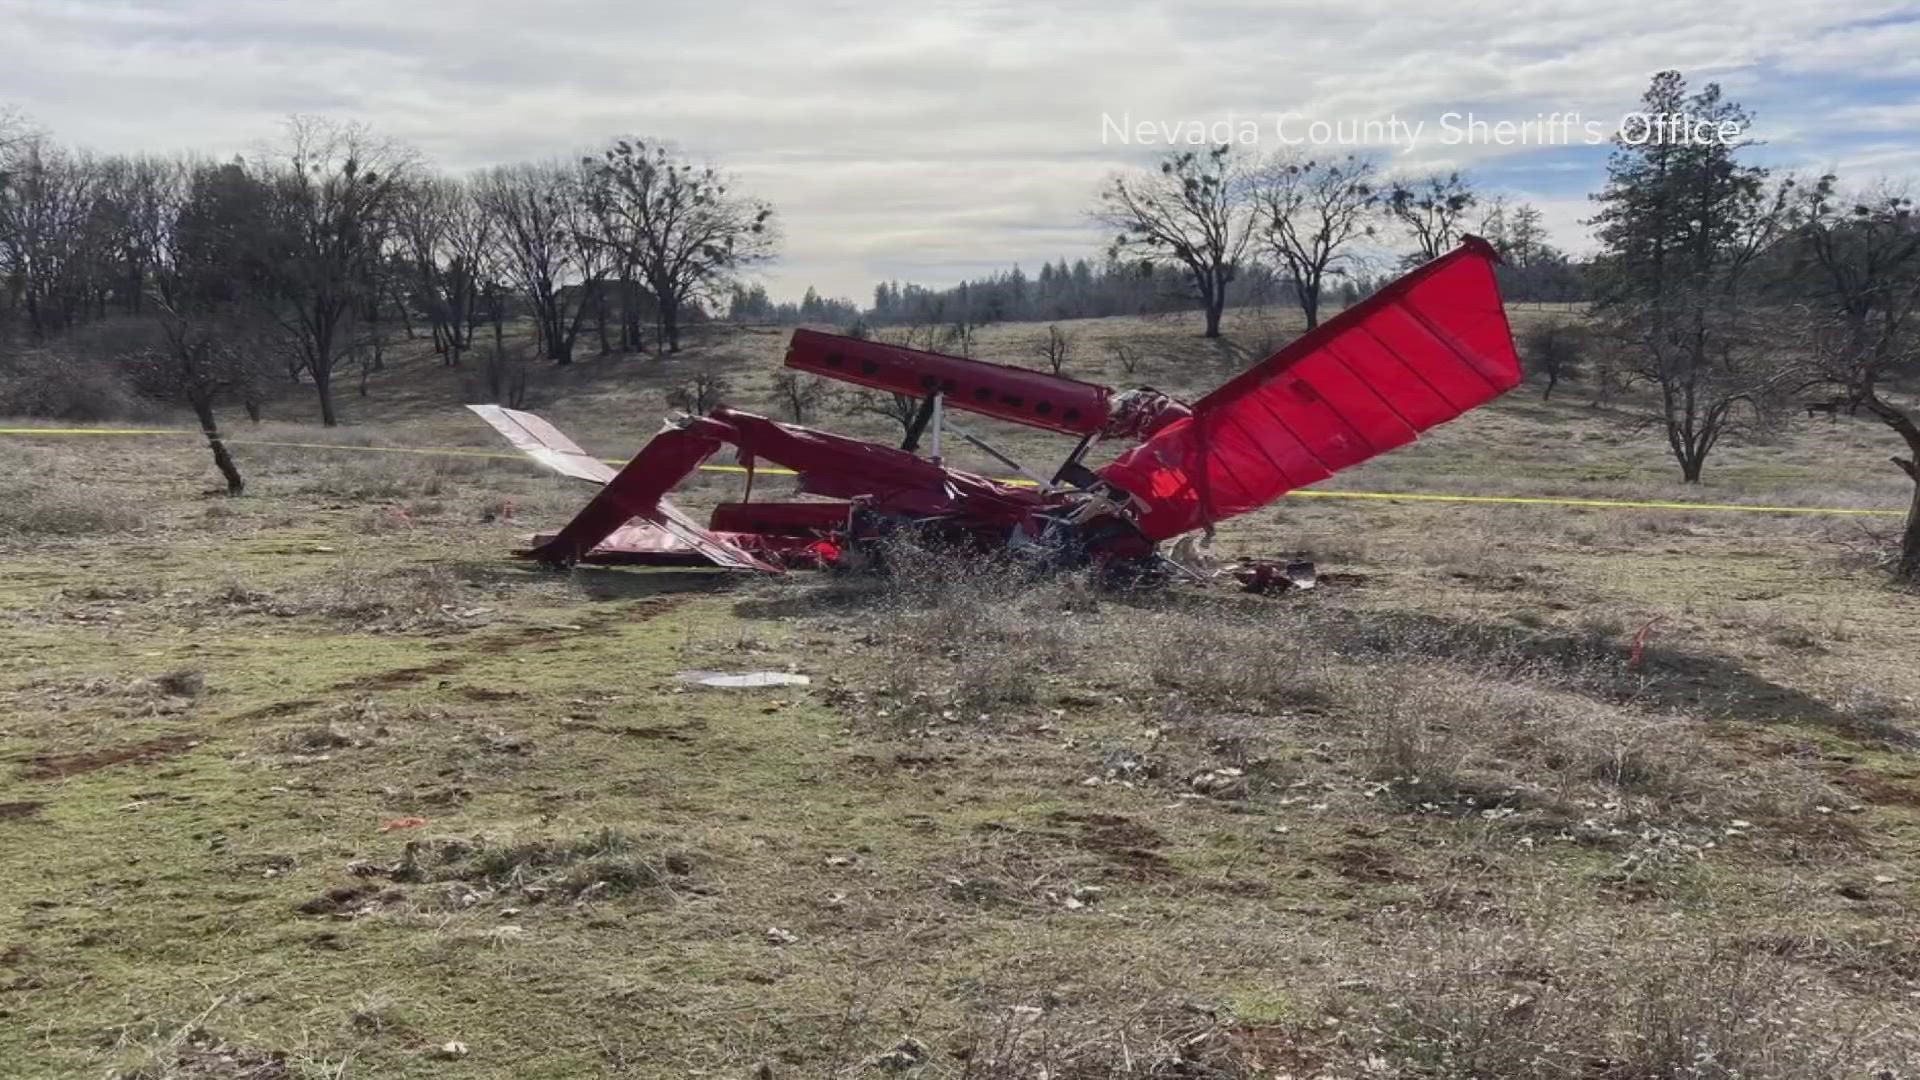 Officials said the plane crashed in Grass Valley Sunday afternoon. The crash killed two people.